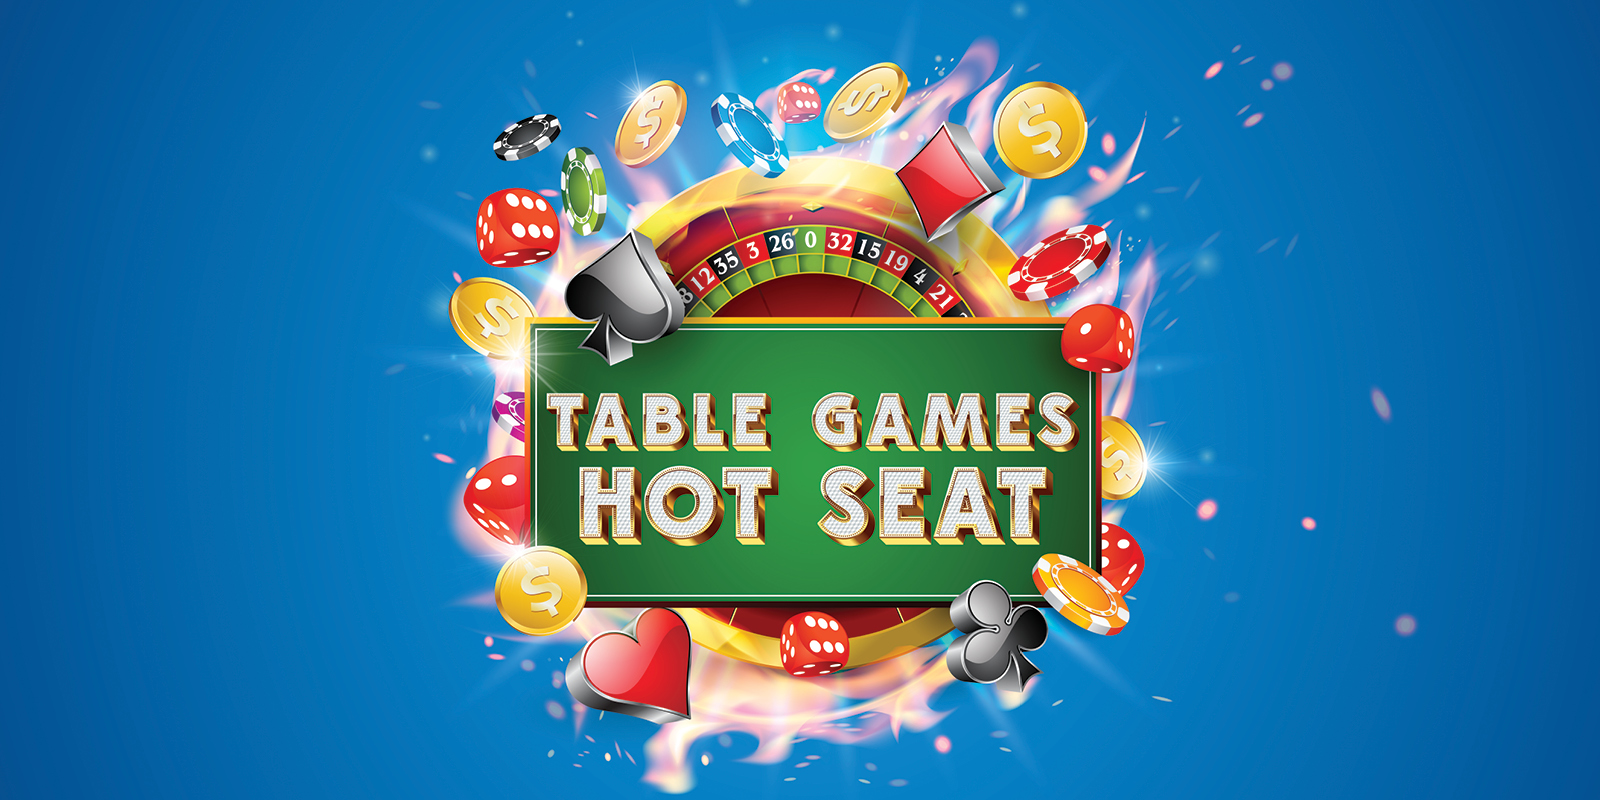 Table Games Hot Seats copy against a casino background